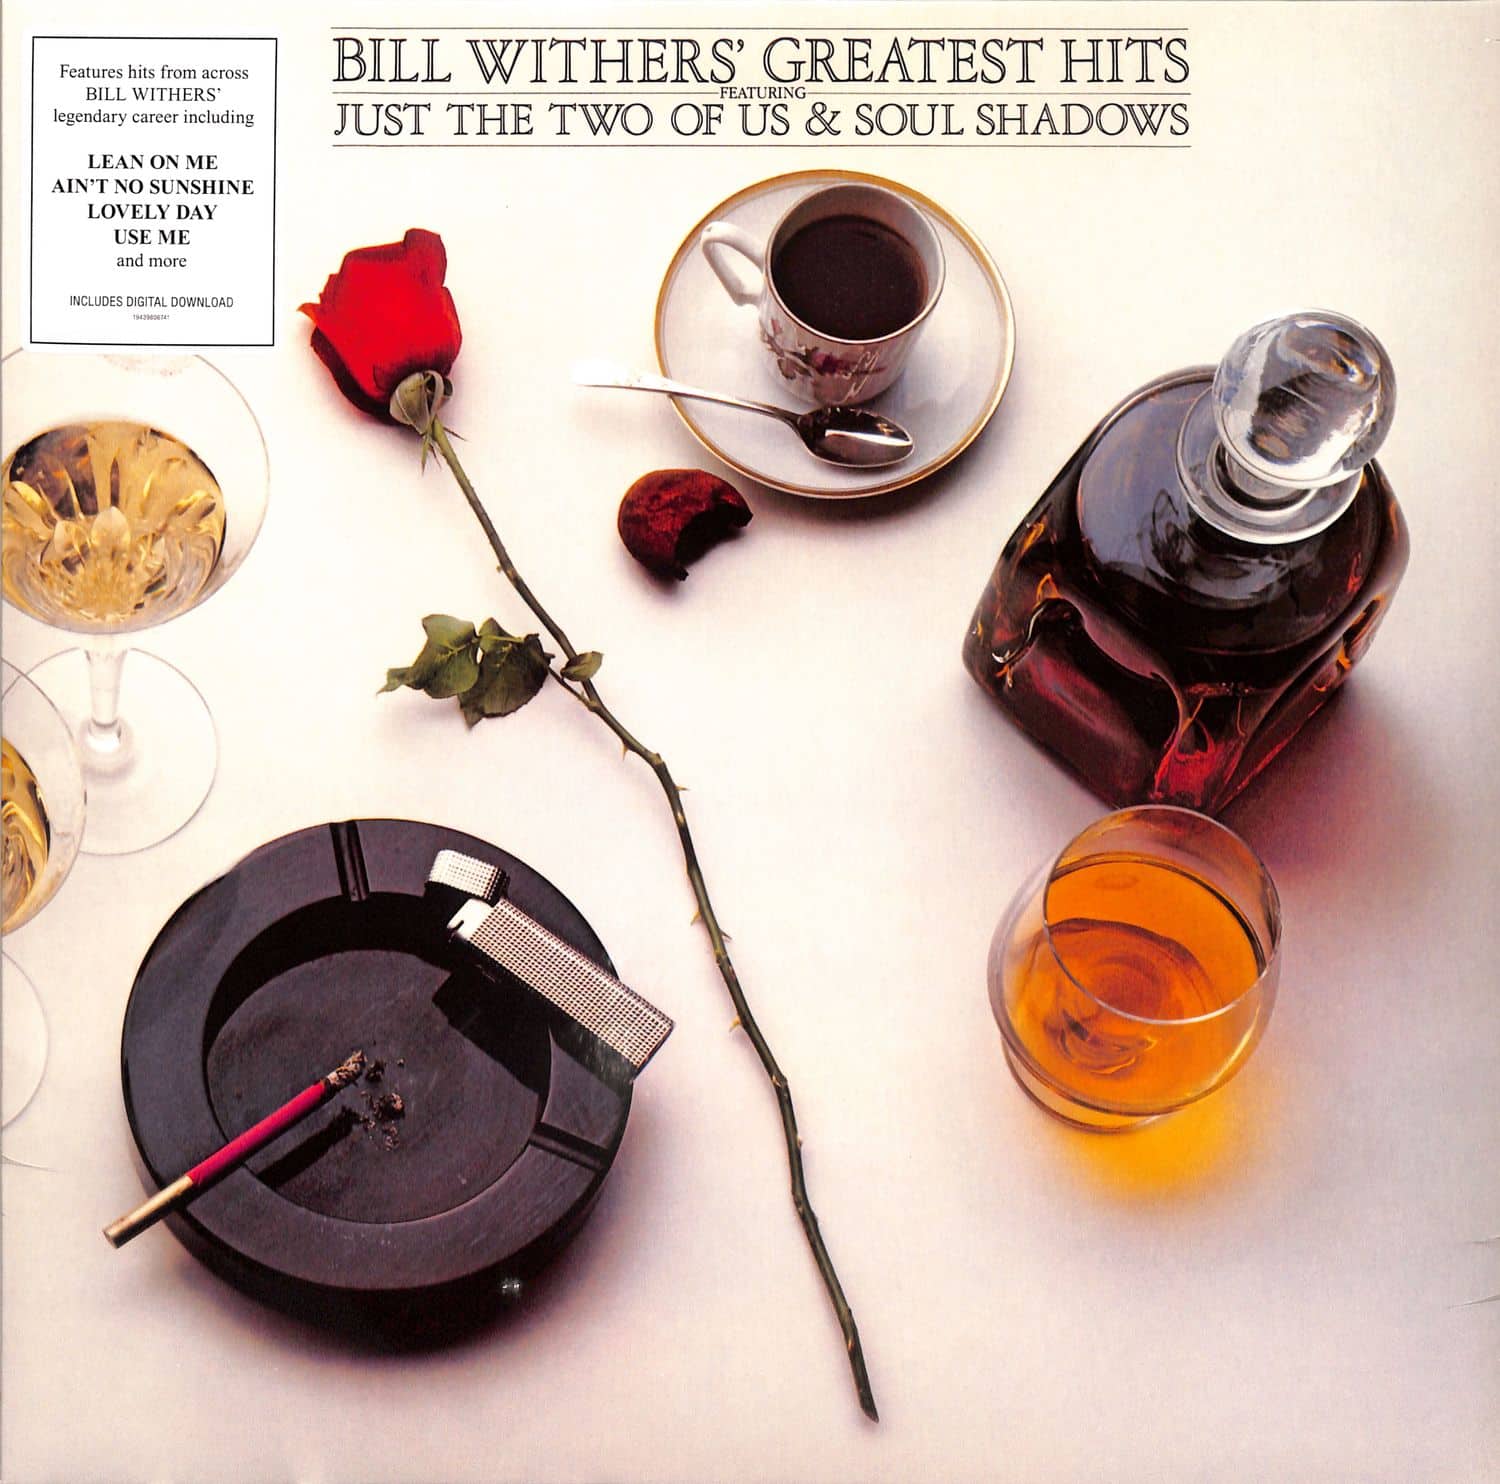 Bill Withers - GREATEST HITS 